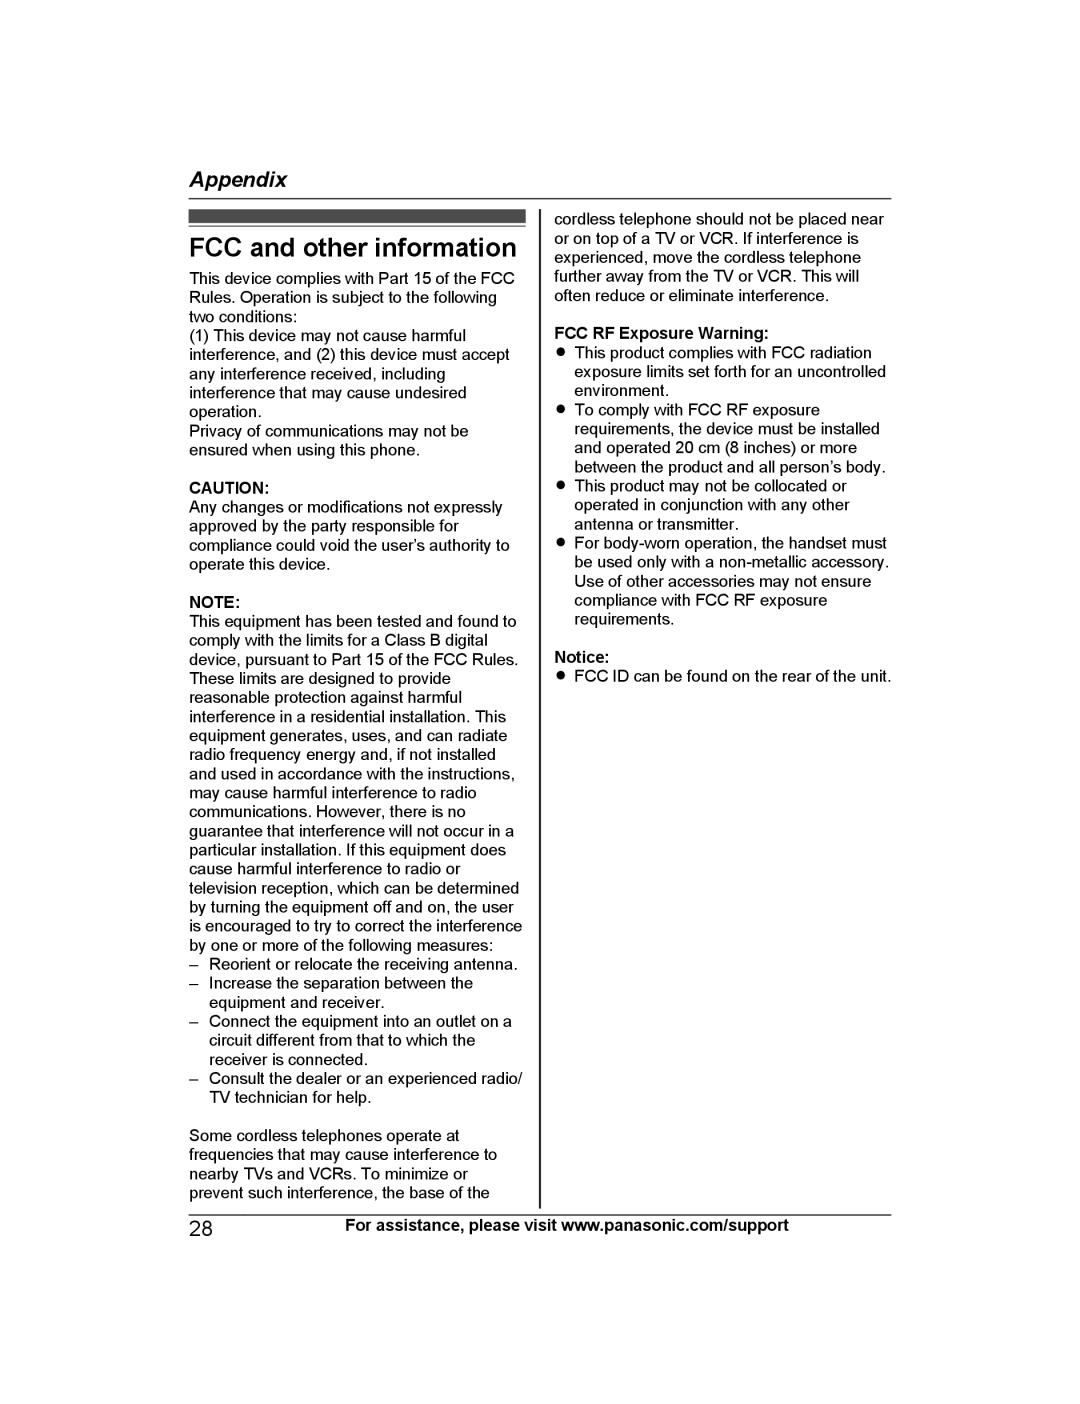 Panasonic KX-HNC600 manual FCC and other information, Appendix, FCC RF Exposure Warning 